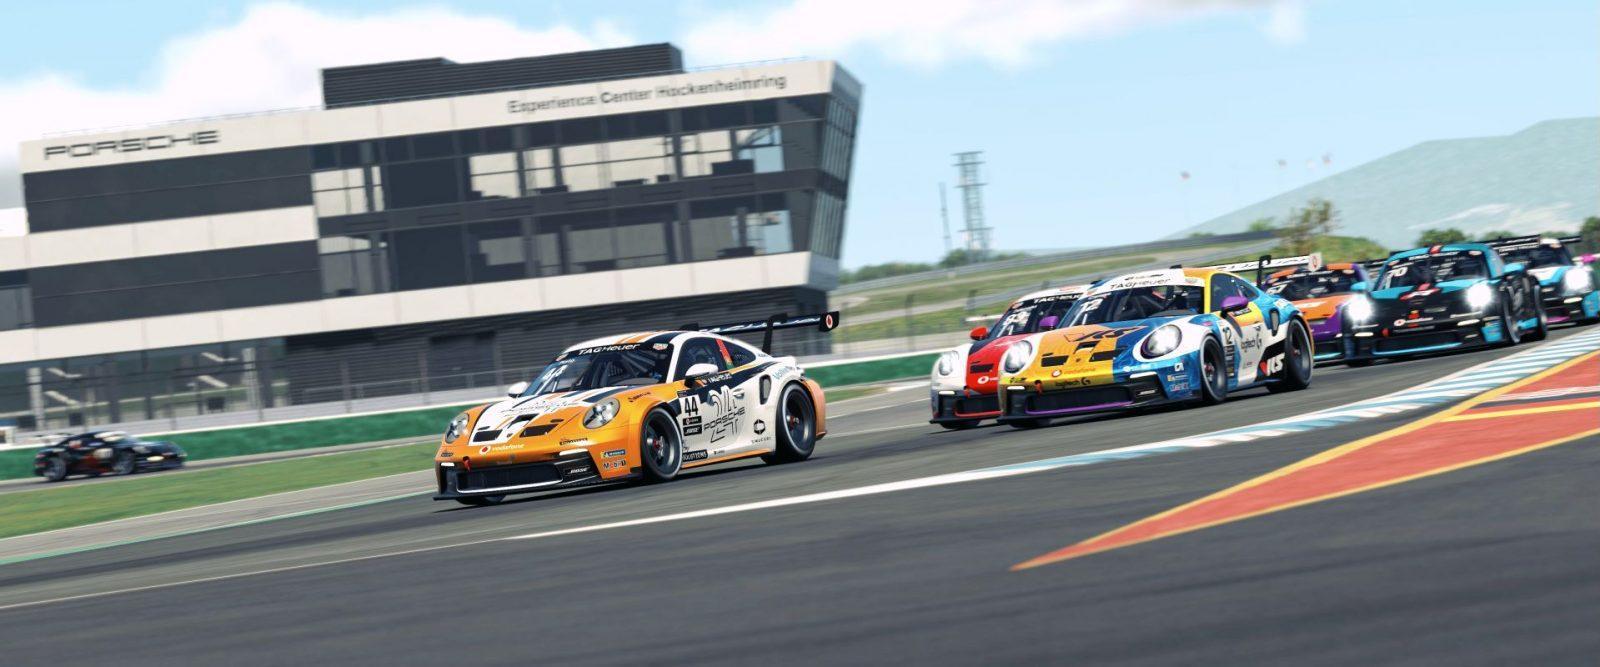 3 Major Revelations from the Porsche Tag Heuer Esports Supercup Round 1